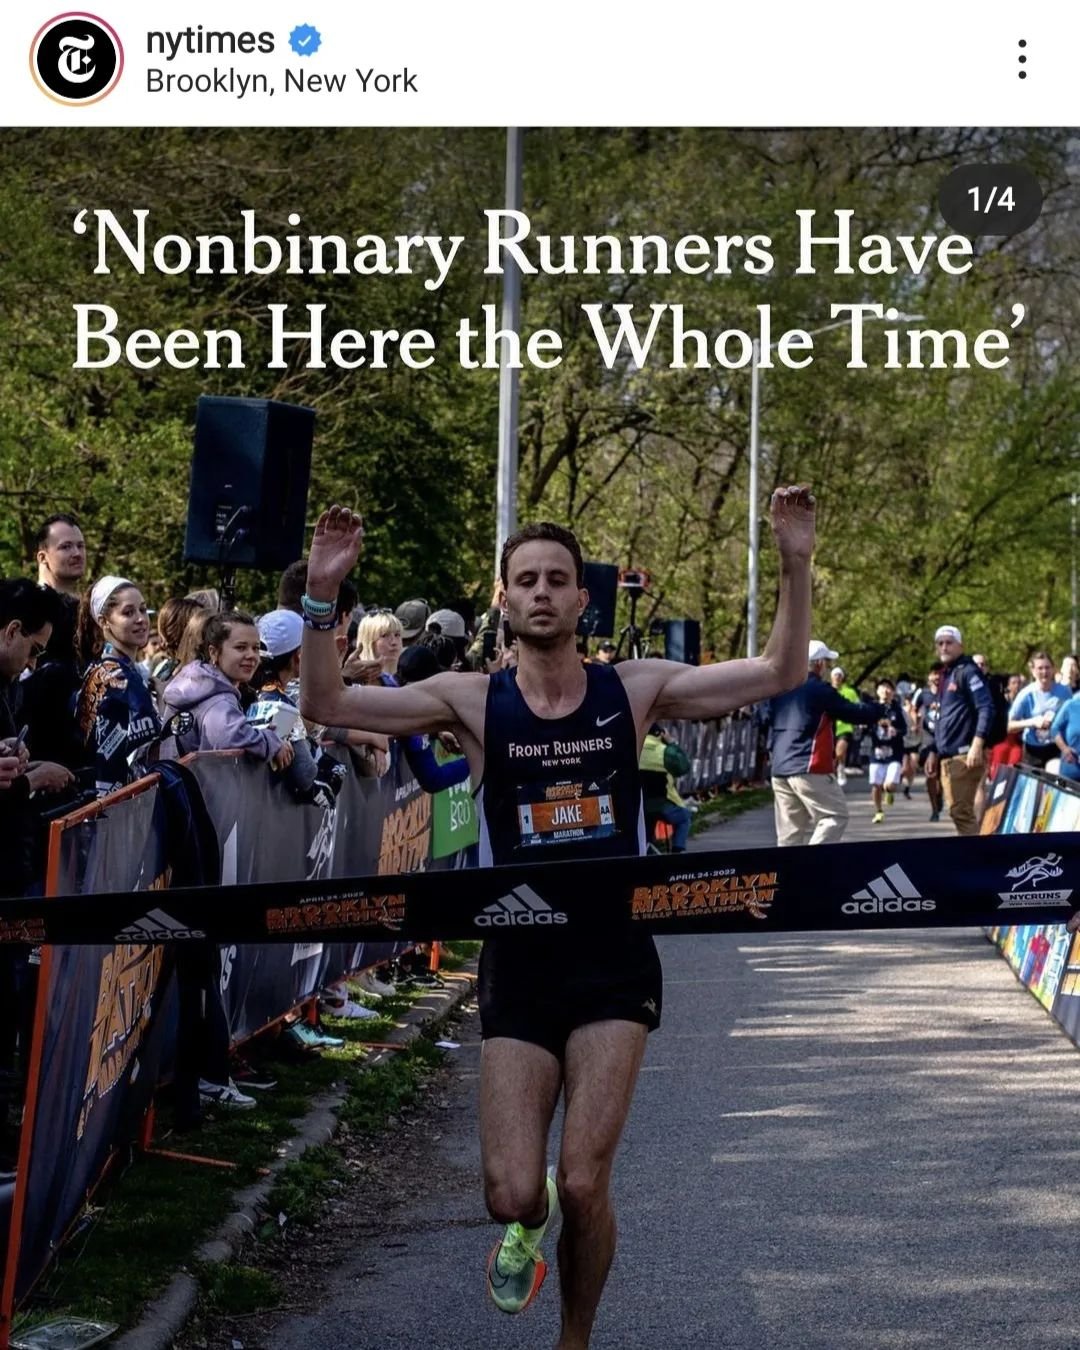 New @nytimes article about finally acknowledging non-binary runners in races. We are so proud to honor the accomplishments of all our participants, as one of the few track meets with a non-binary gender category. All are welcome at Pride Meet!

Also,